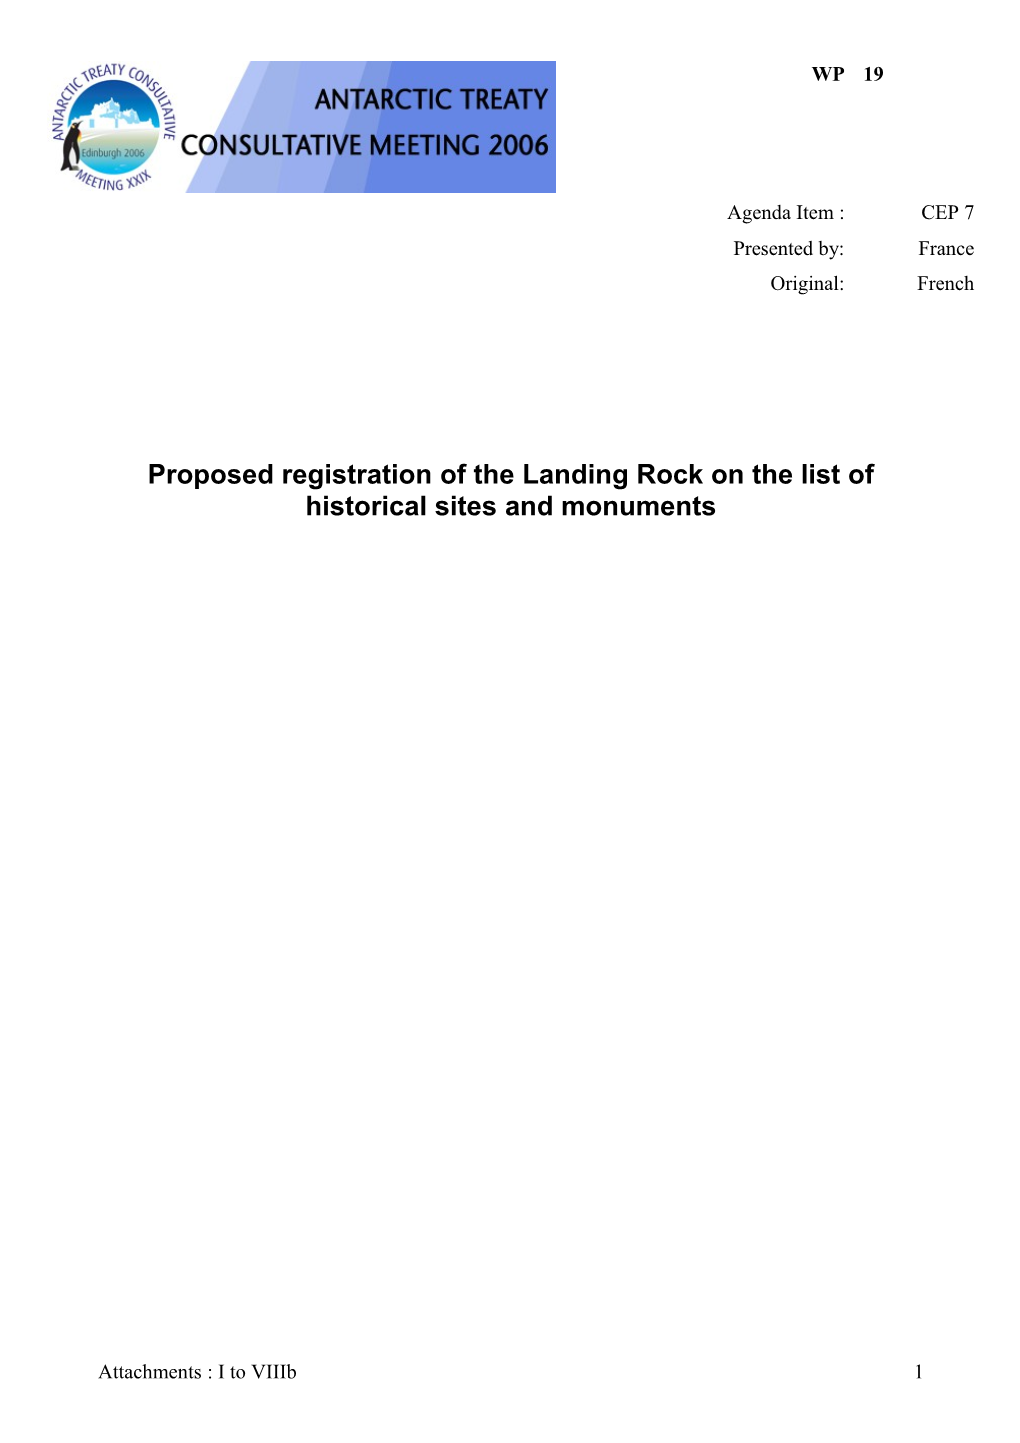 Proposed Registration of the Landing Rock on the List of Historical Sites and Monuments